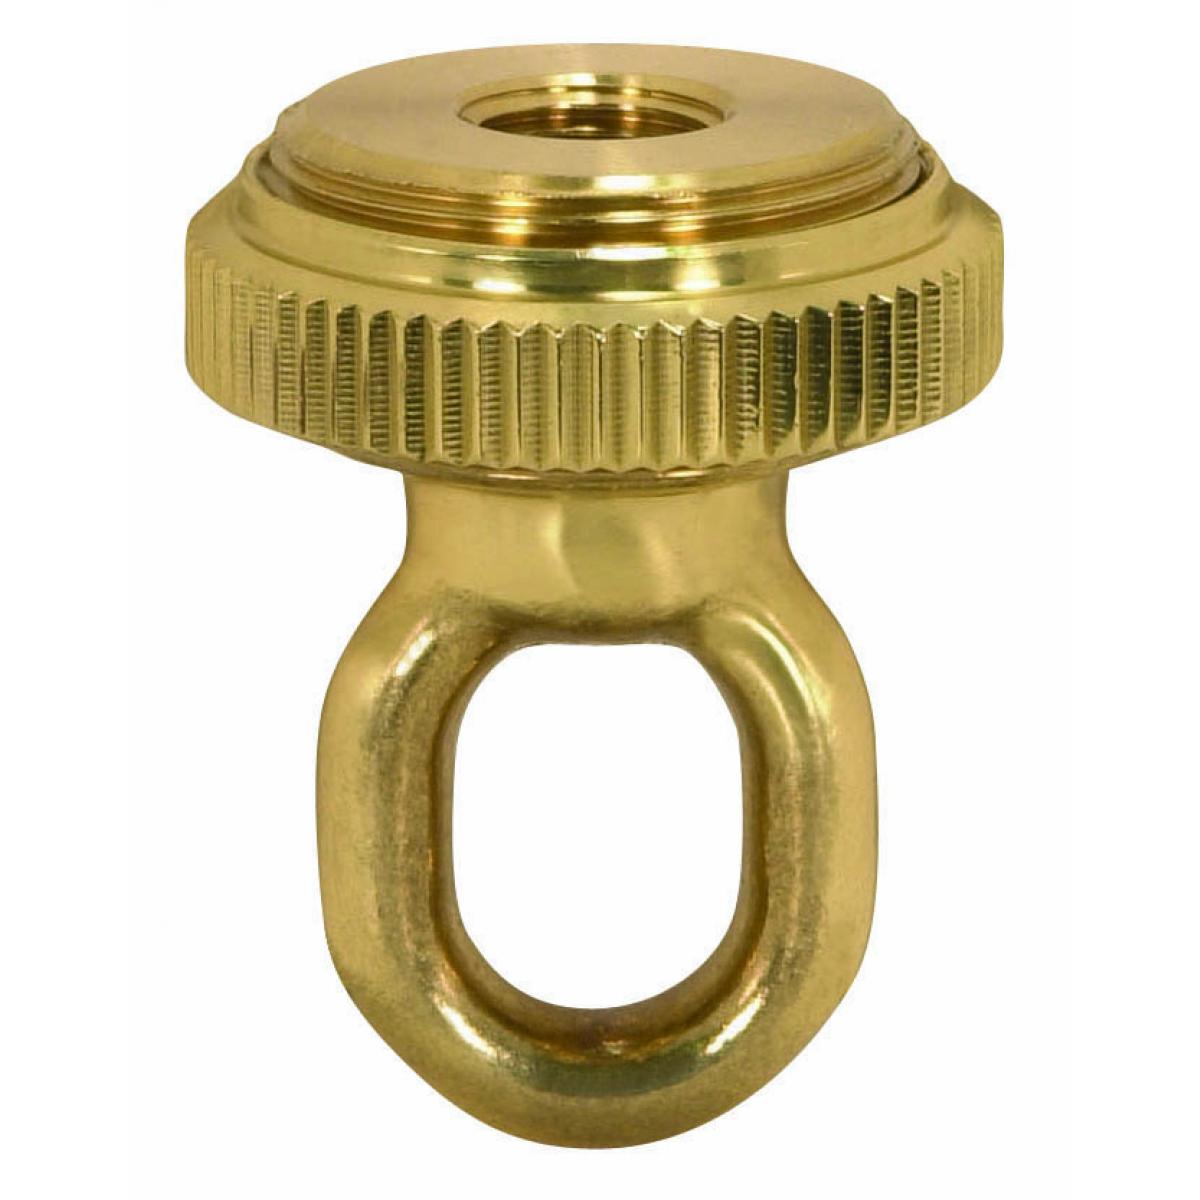 Satco 90-2299 1/4 IP Heavy Duty Cast Brass Screw Collar Loops with Ring 1/4 IP Fits 1-1/4" Canopy Hole Ring Diameter 1-5/8" Height 2-1/4"